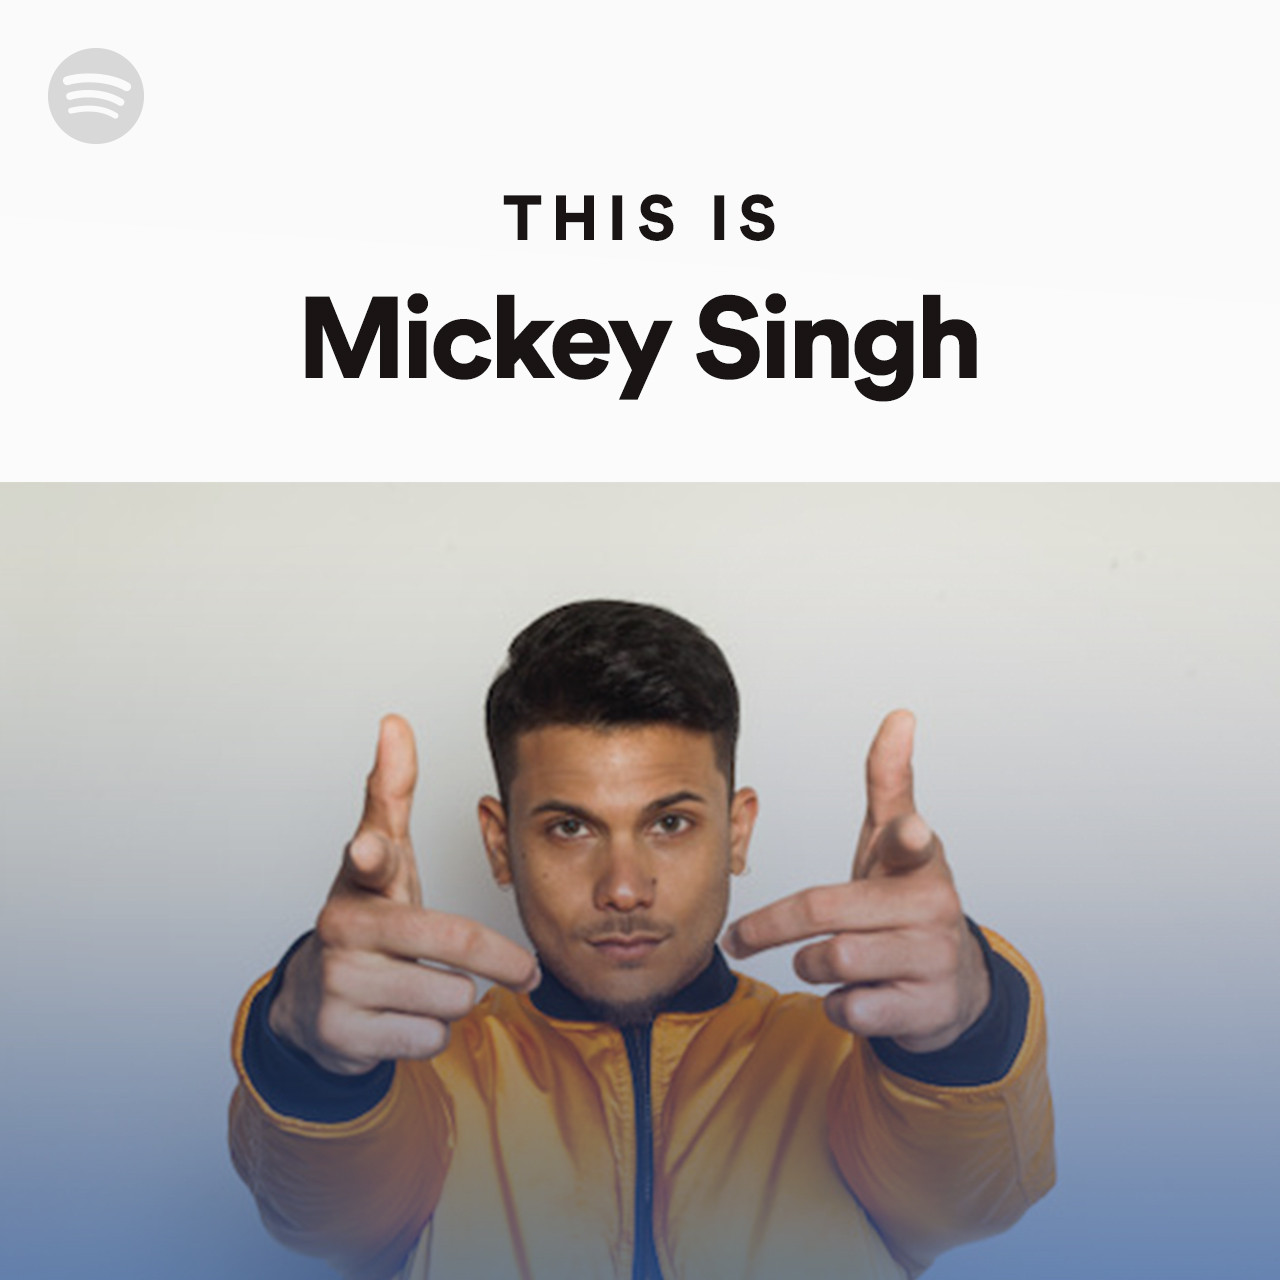 This Is Mickey Singh